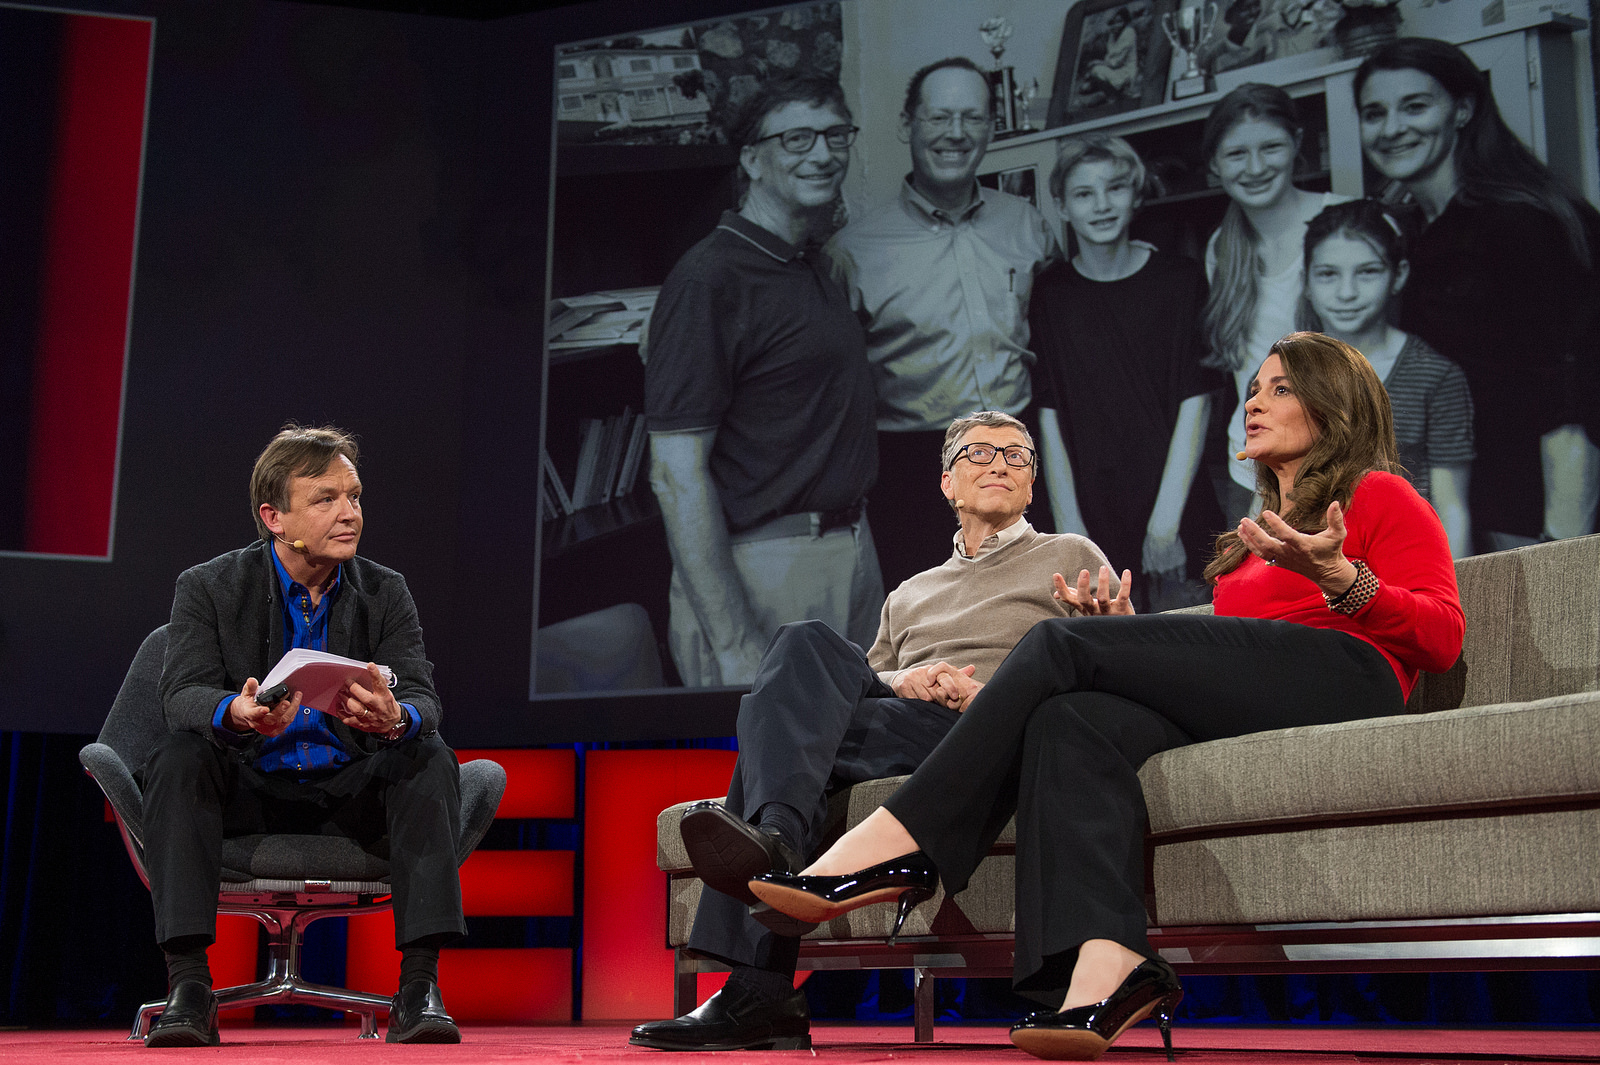 Chris Anderson interviews Bill and Melinda Gates, asking them about their lives as a couple and as parents. Photo: James Duncan Davidson